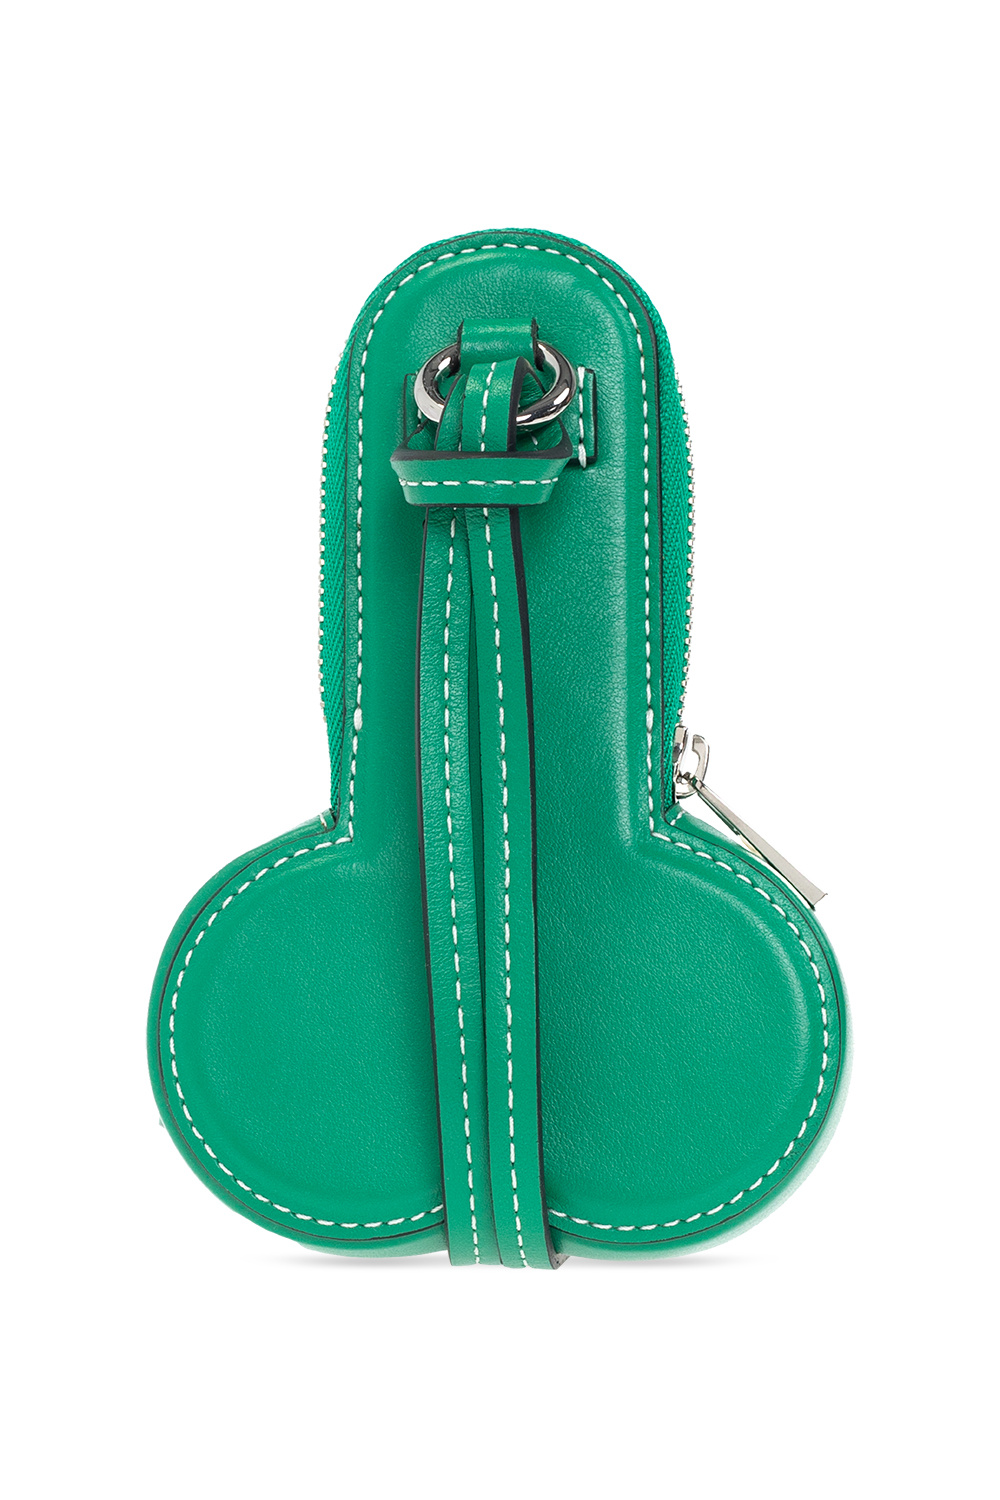 JW Anderson Coin purse with logo